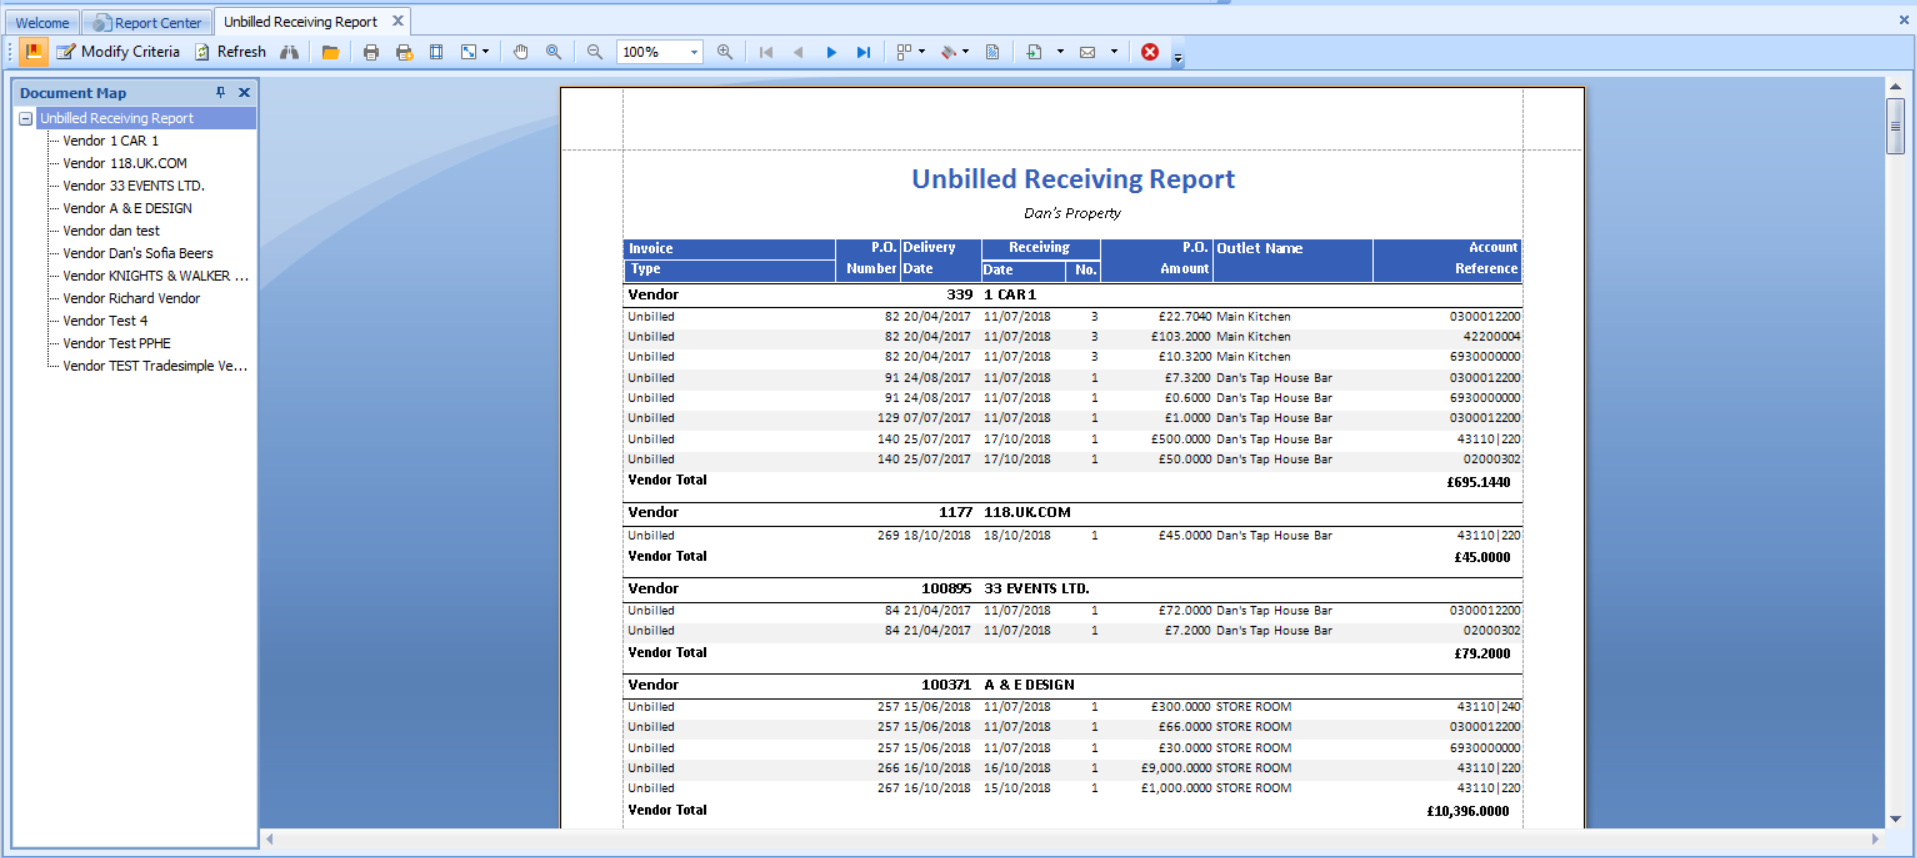 Fig. 3 - Unbilled Receiving Report